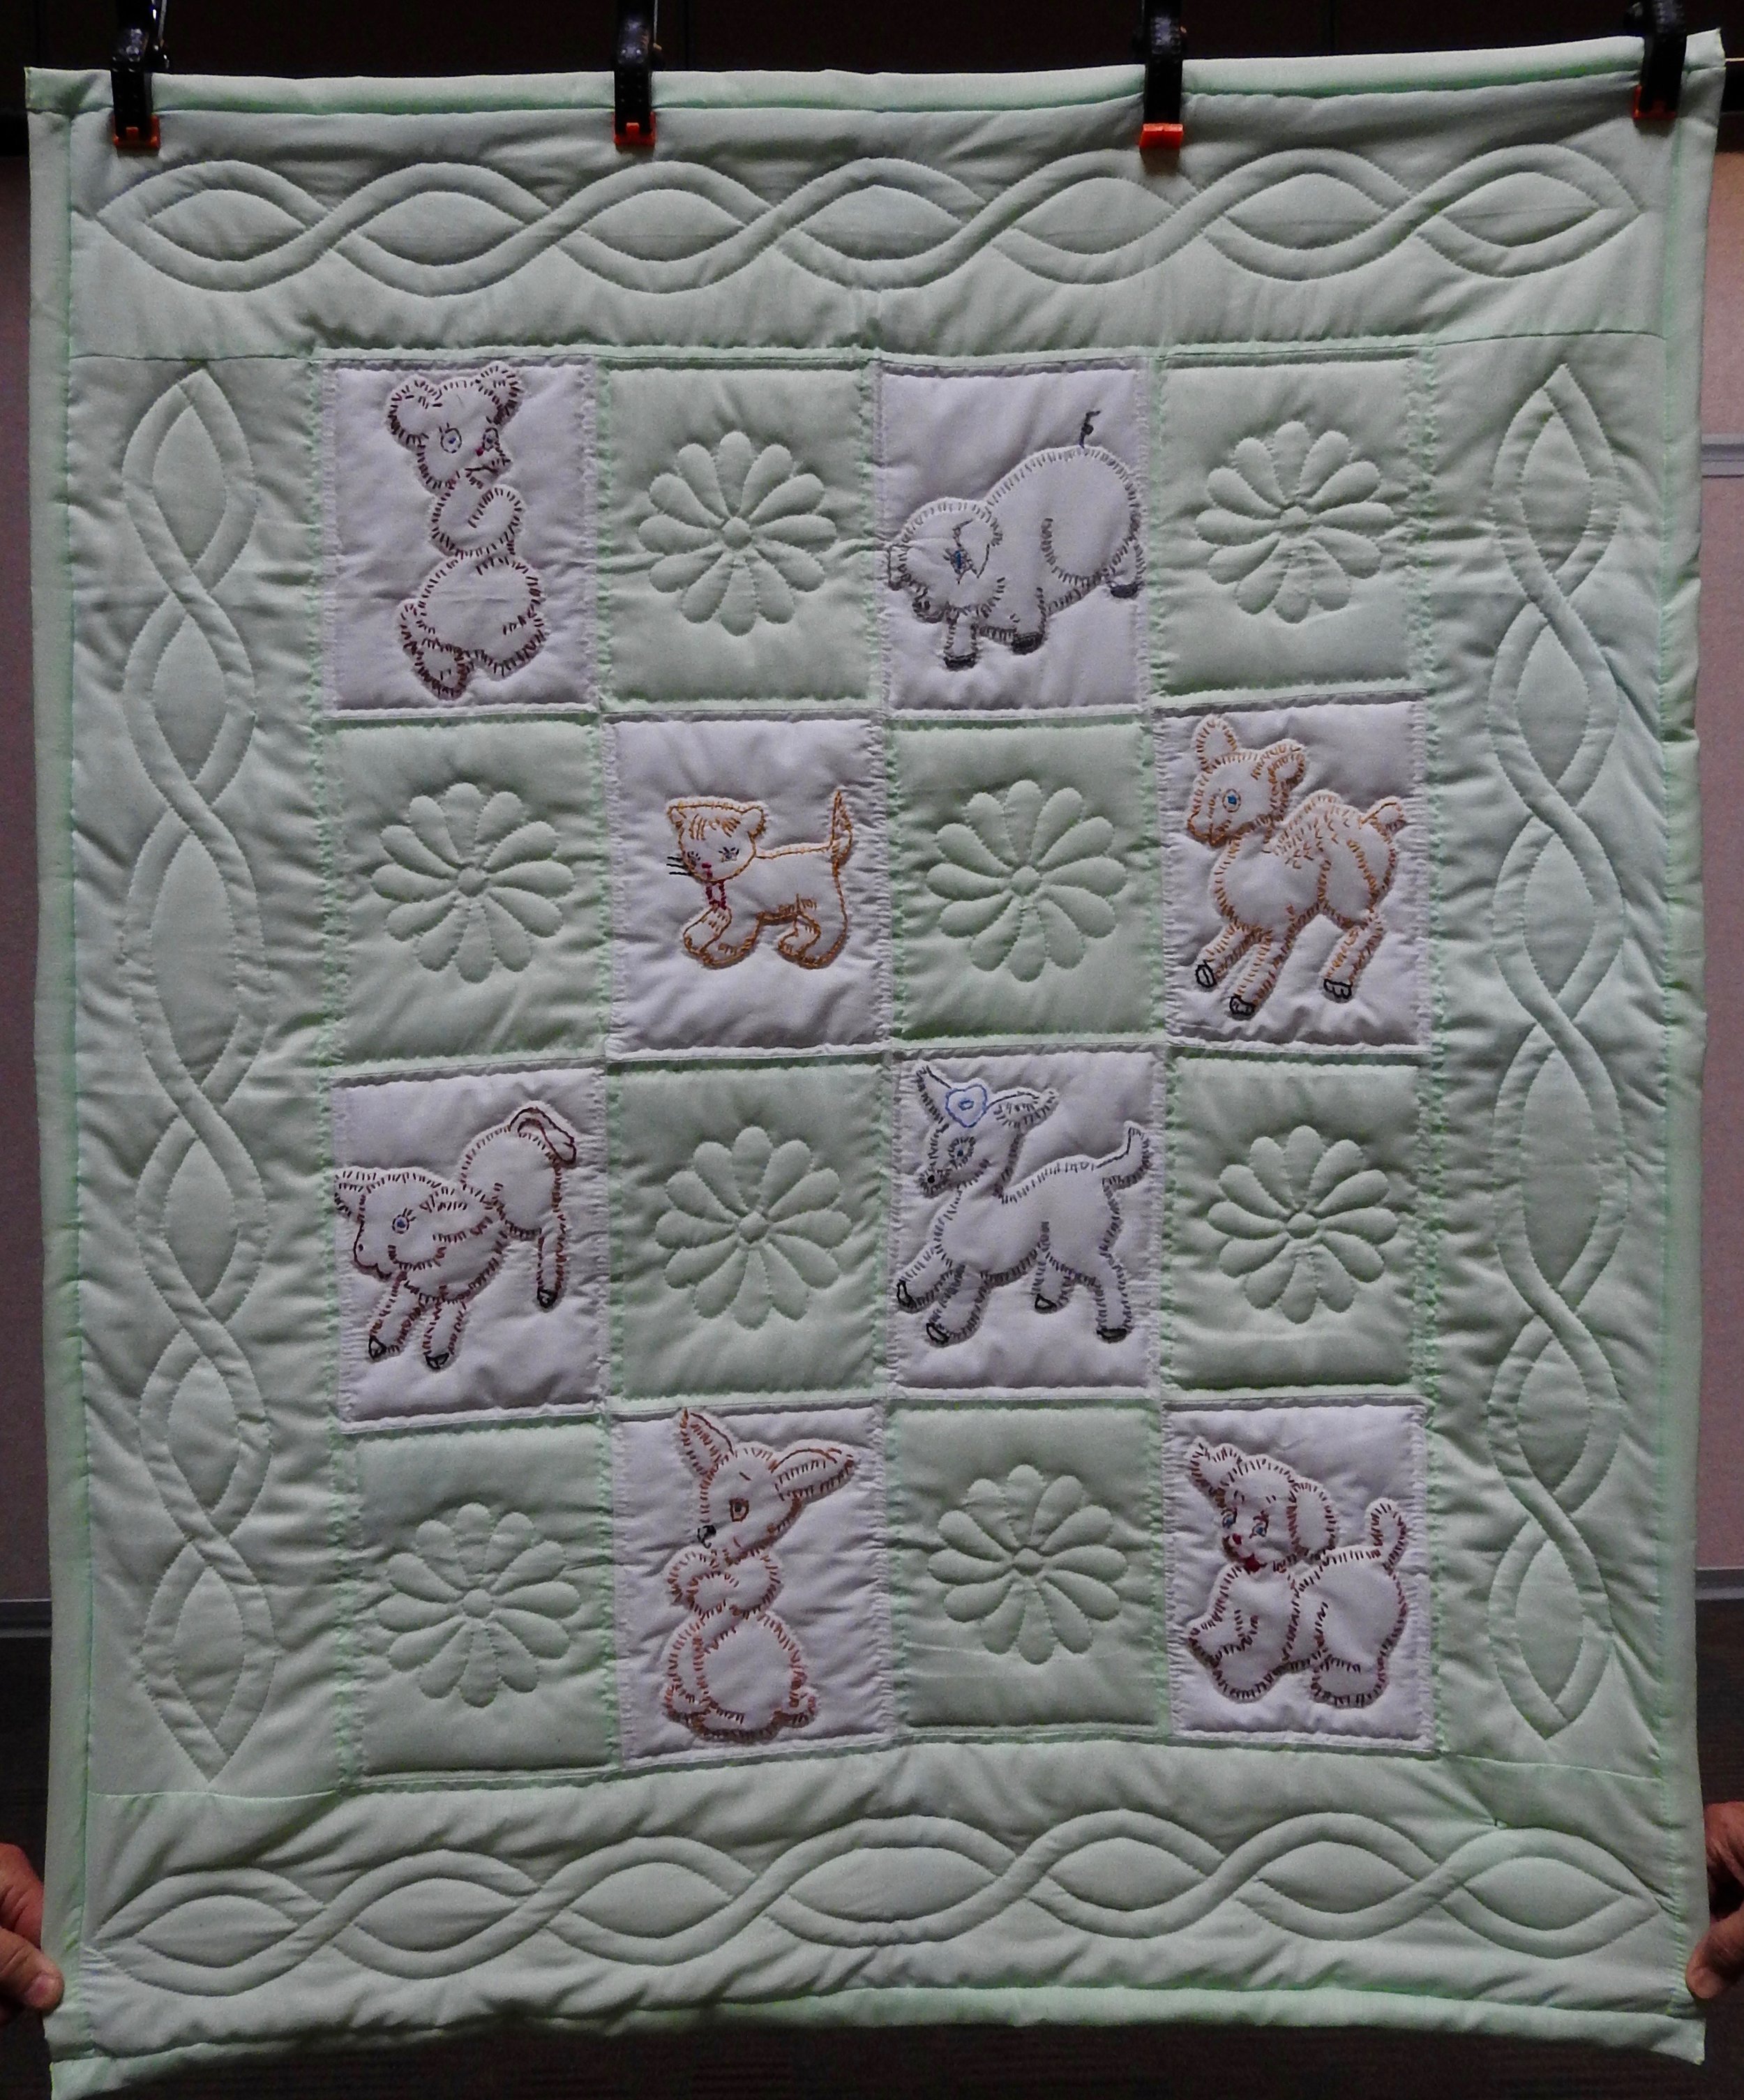 Precious Pets Baby Quilt, Pieced, Embroidered, Hand Quilted, donated by First Mennonite, Middlebury, 36 x 43”